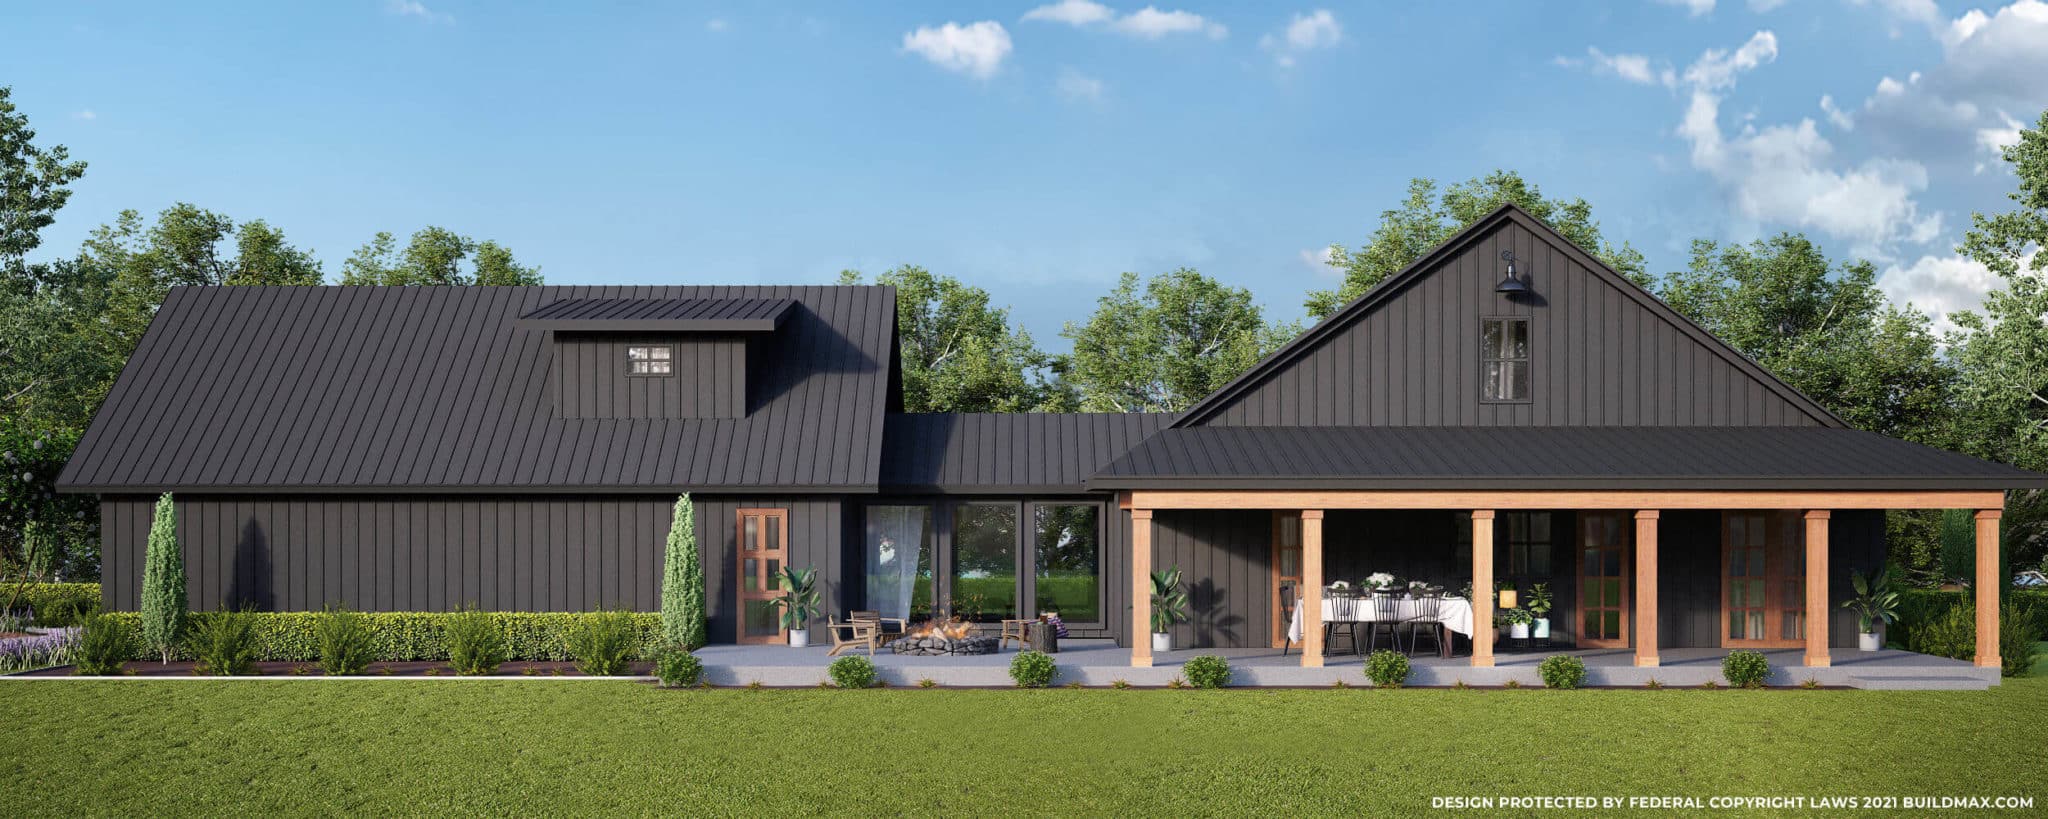 Black barndominium with 3 car garage and covered porch on the rear